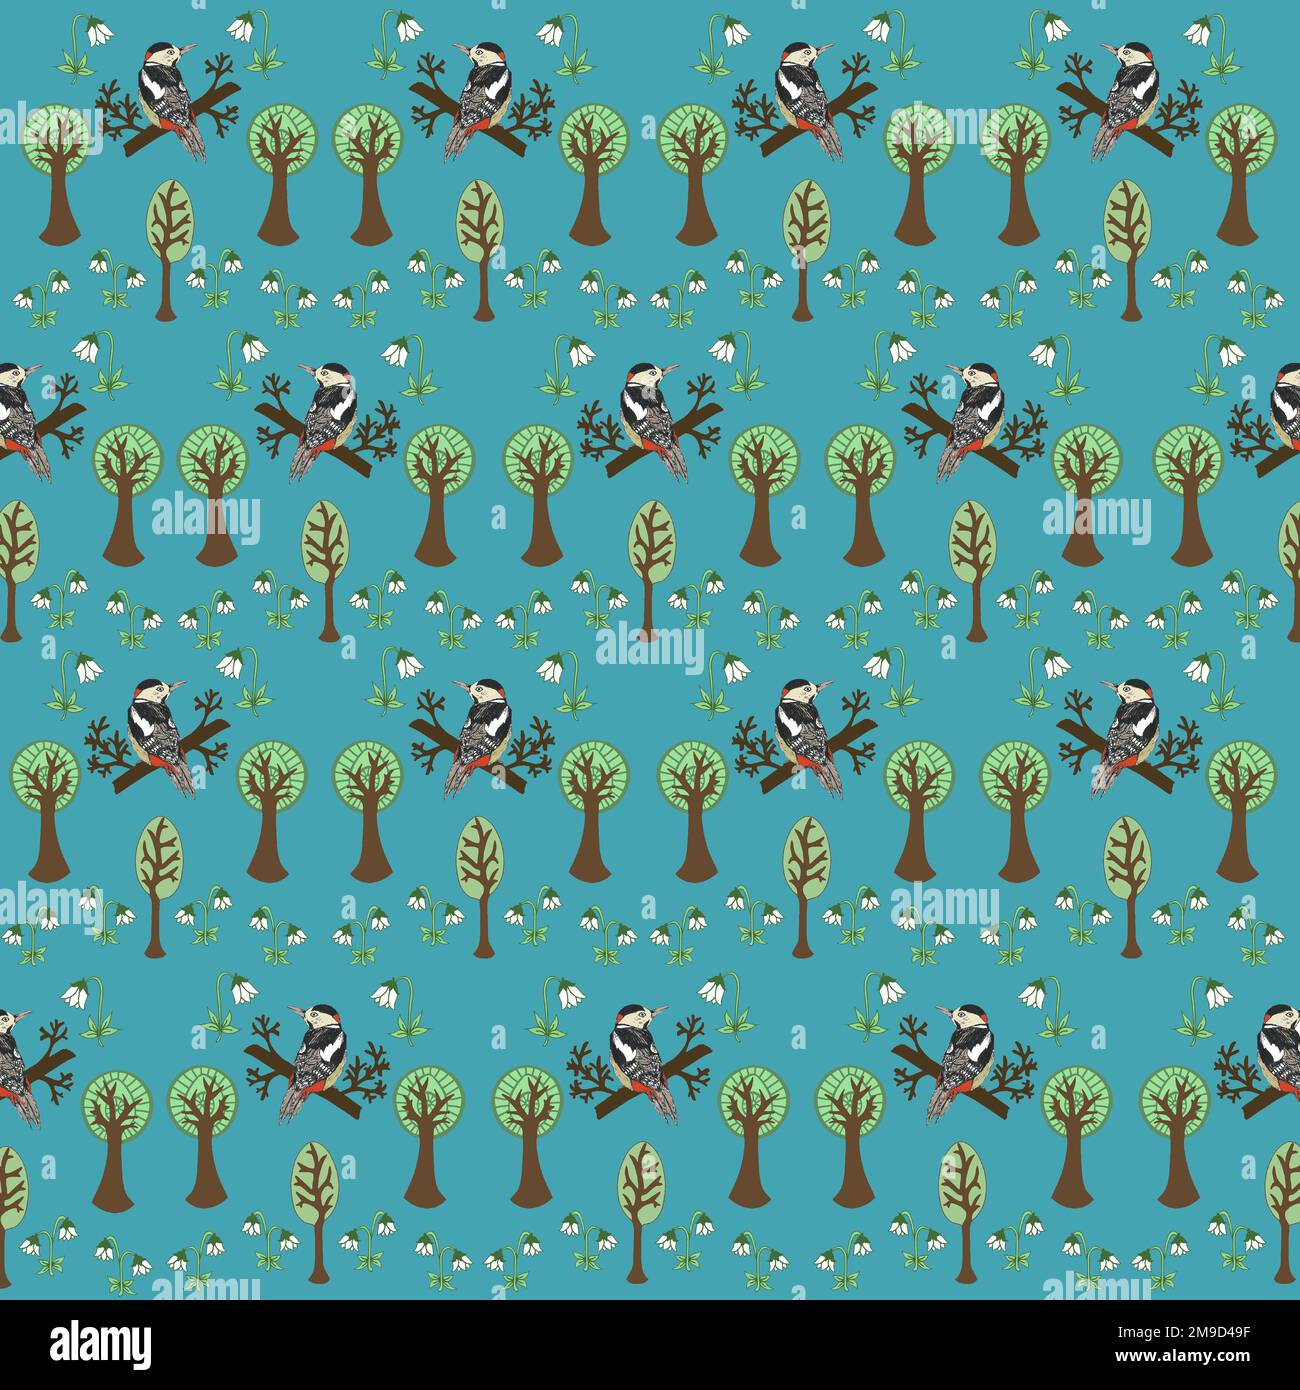 Woodpeckers in forest repeating pattern. Stock Photo